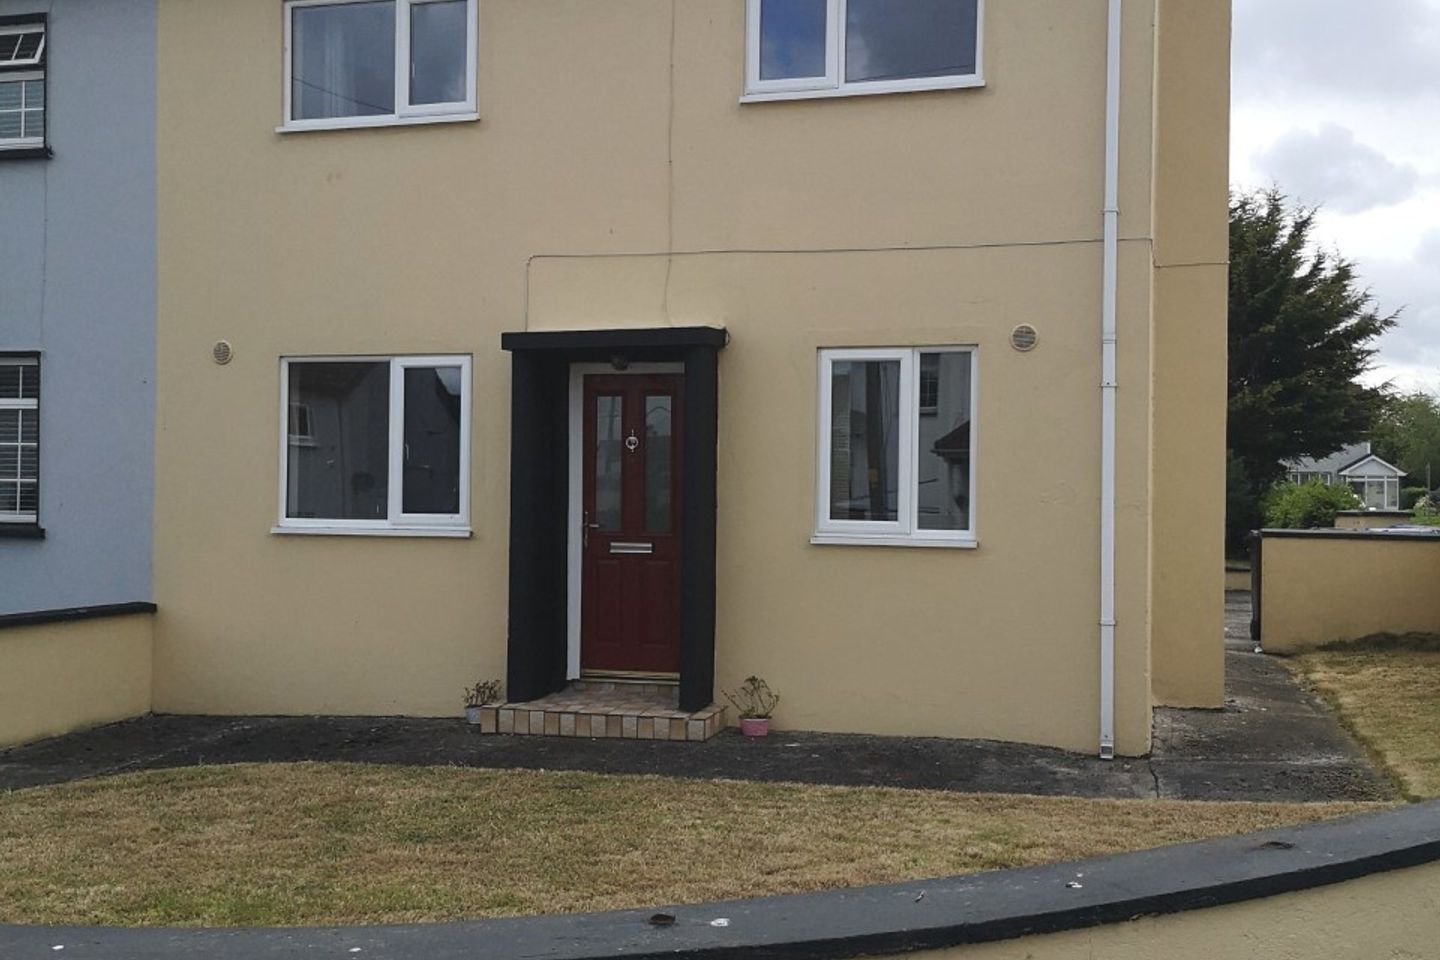 69 Assumption Road, Edenderry, Co. Offaly